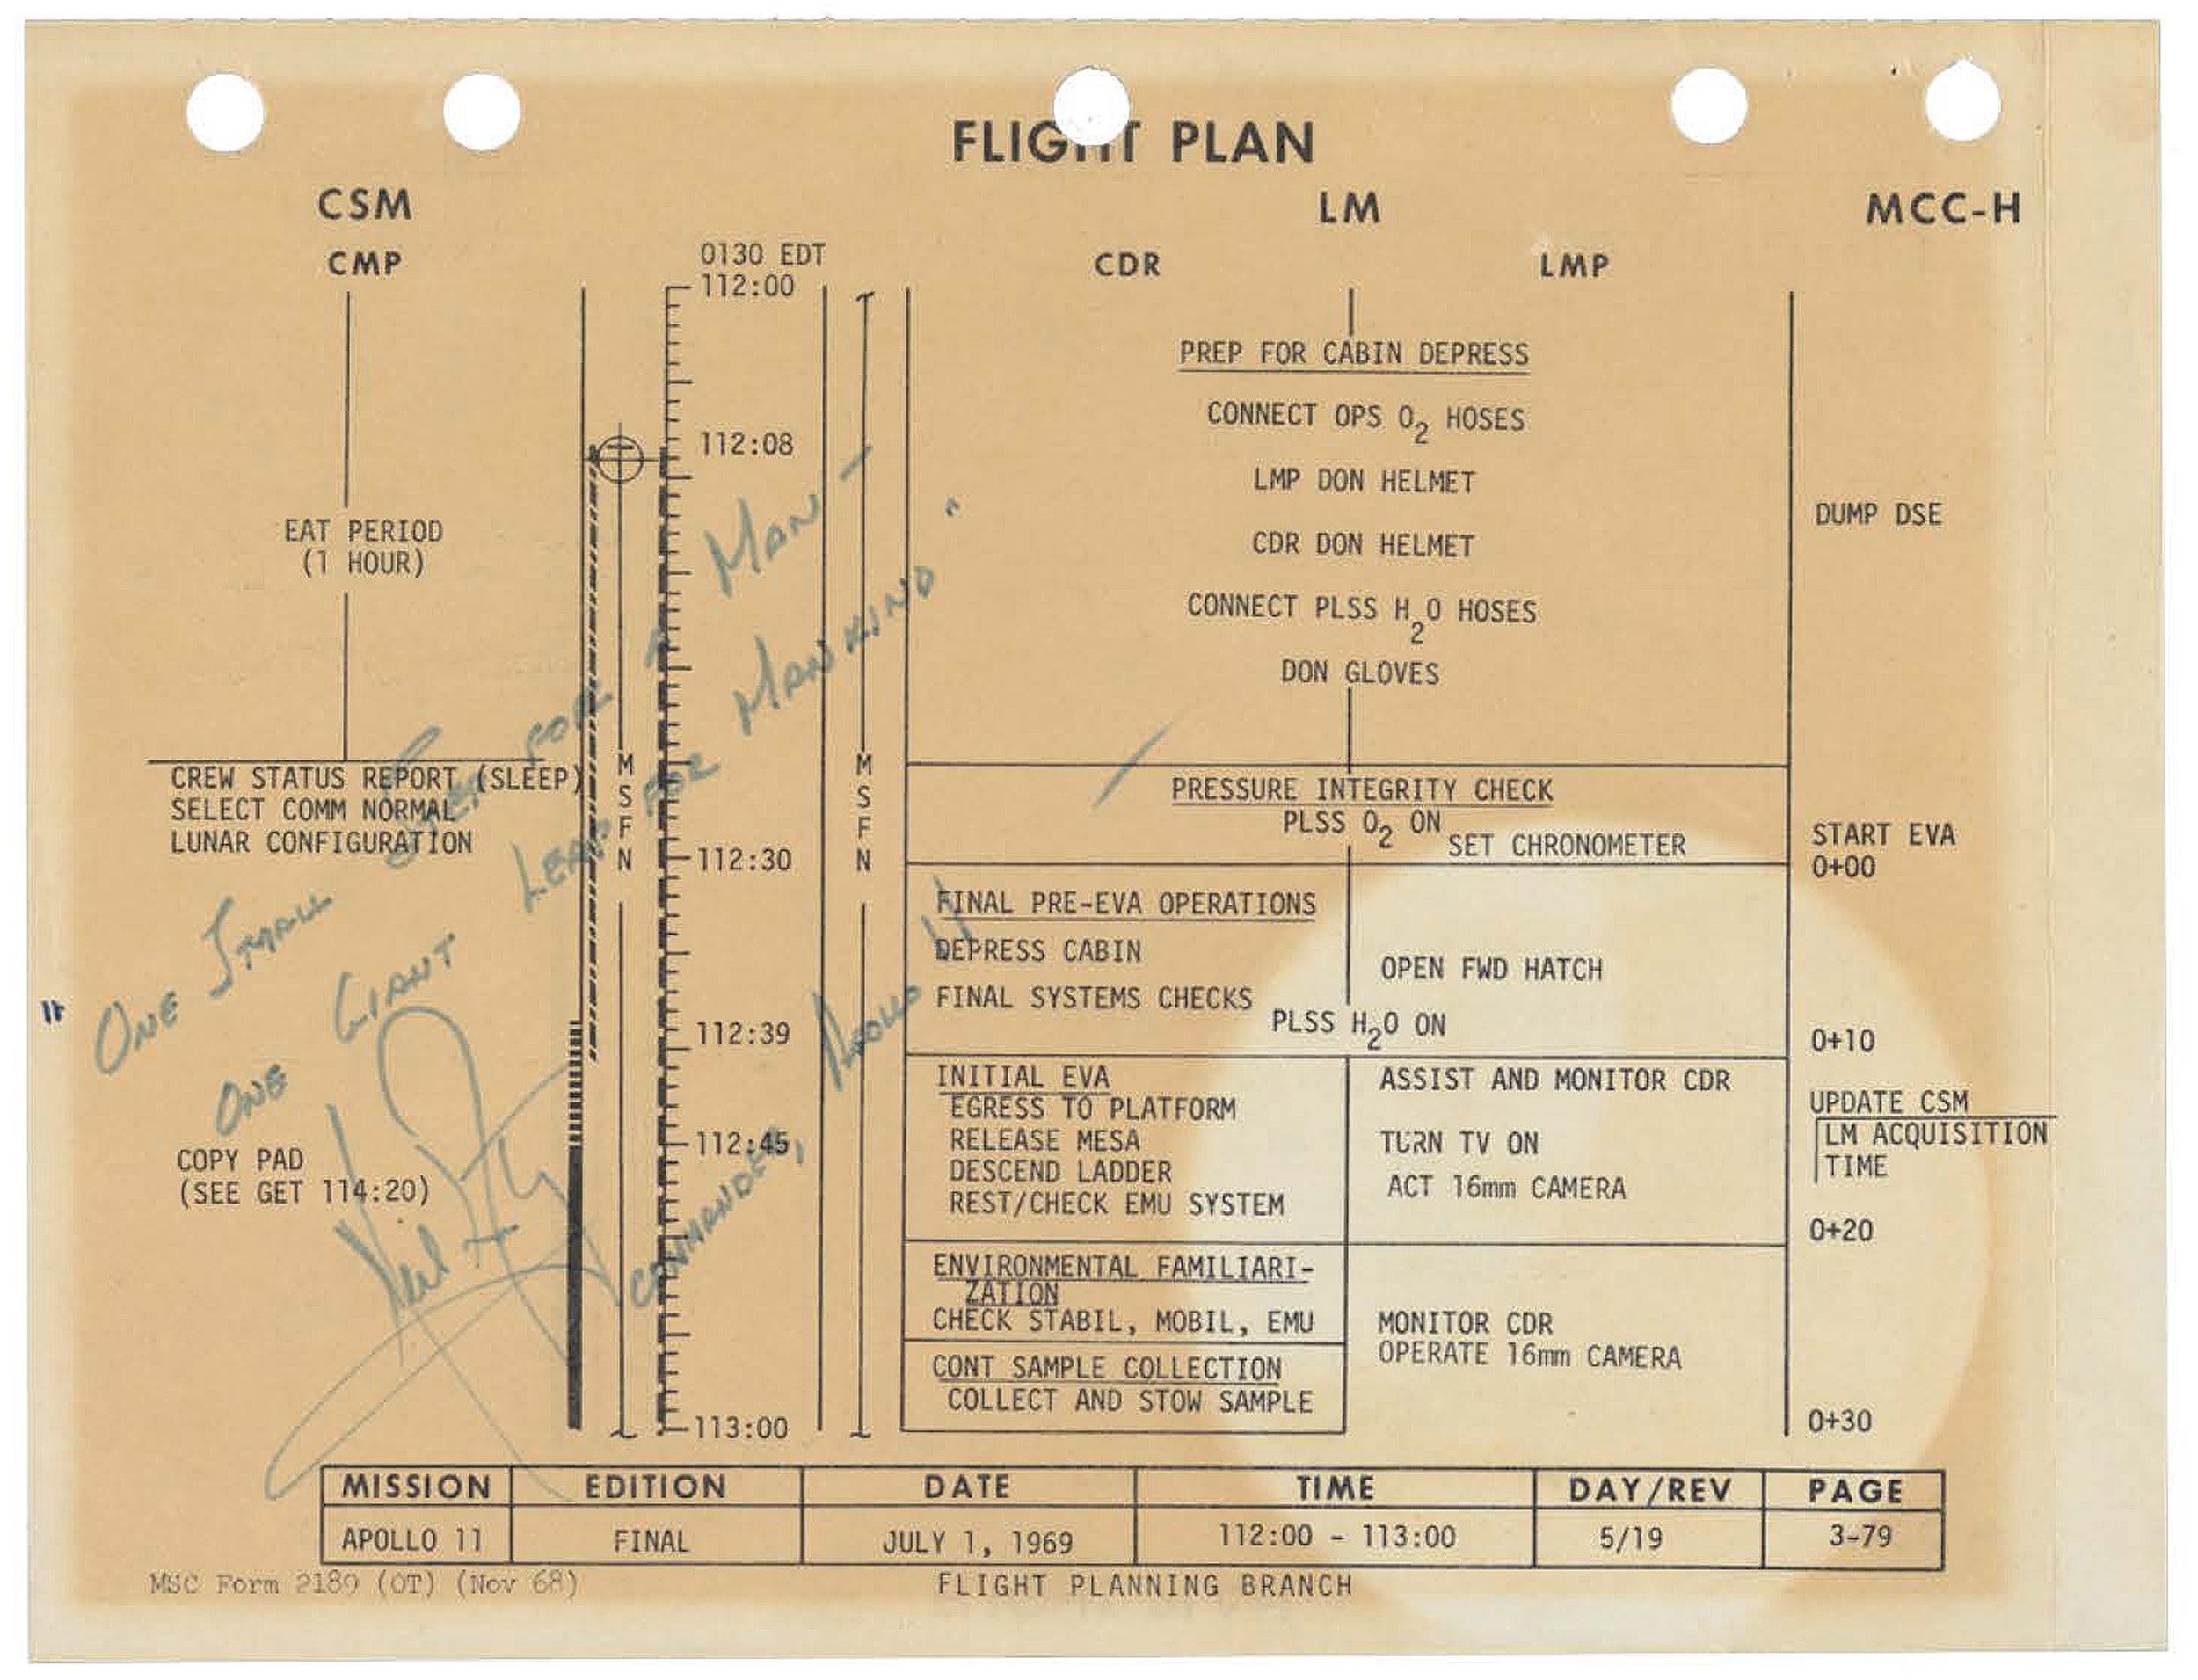 Flight plan inscribed with Neil Armstrong's famous line: “That’s one small step for [a] man, one giant leap for mankind.”